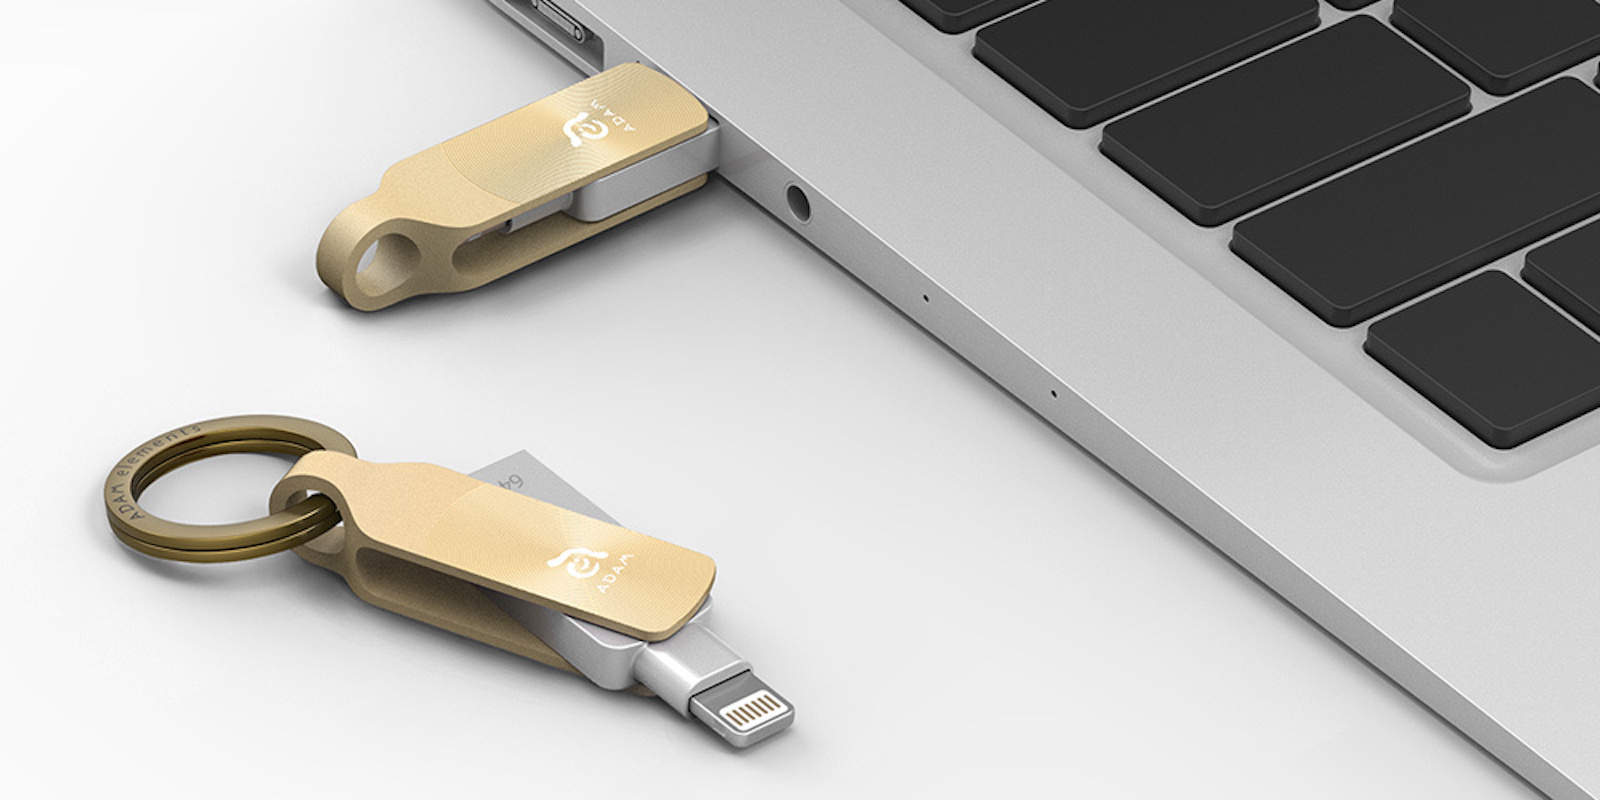 iKlips has created a thumb drive that does double duty for Lightning and USB connections alike.